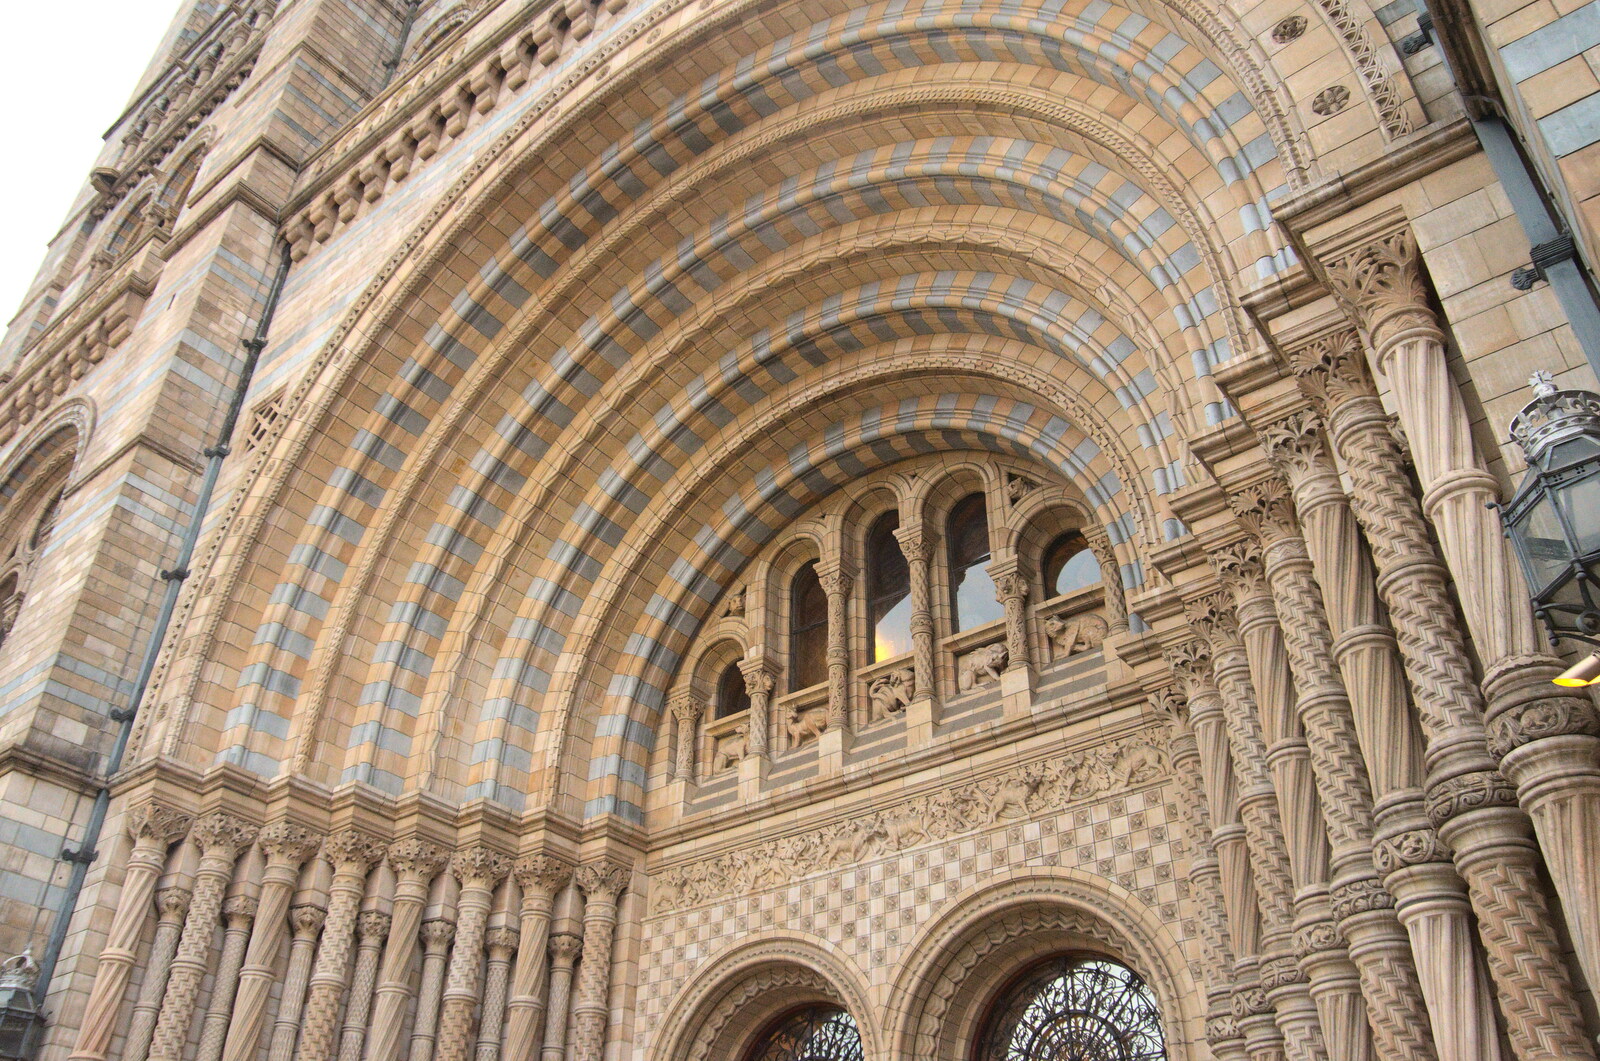 The grand entrance from A Trip to the Natural History Museum, Kensington, London - 15th January 2022